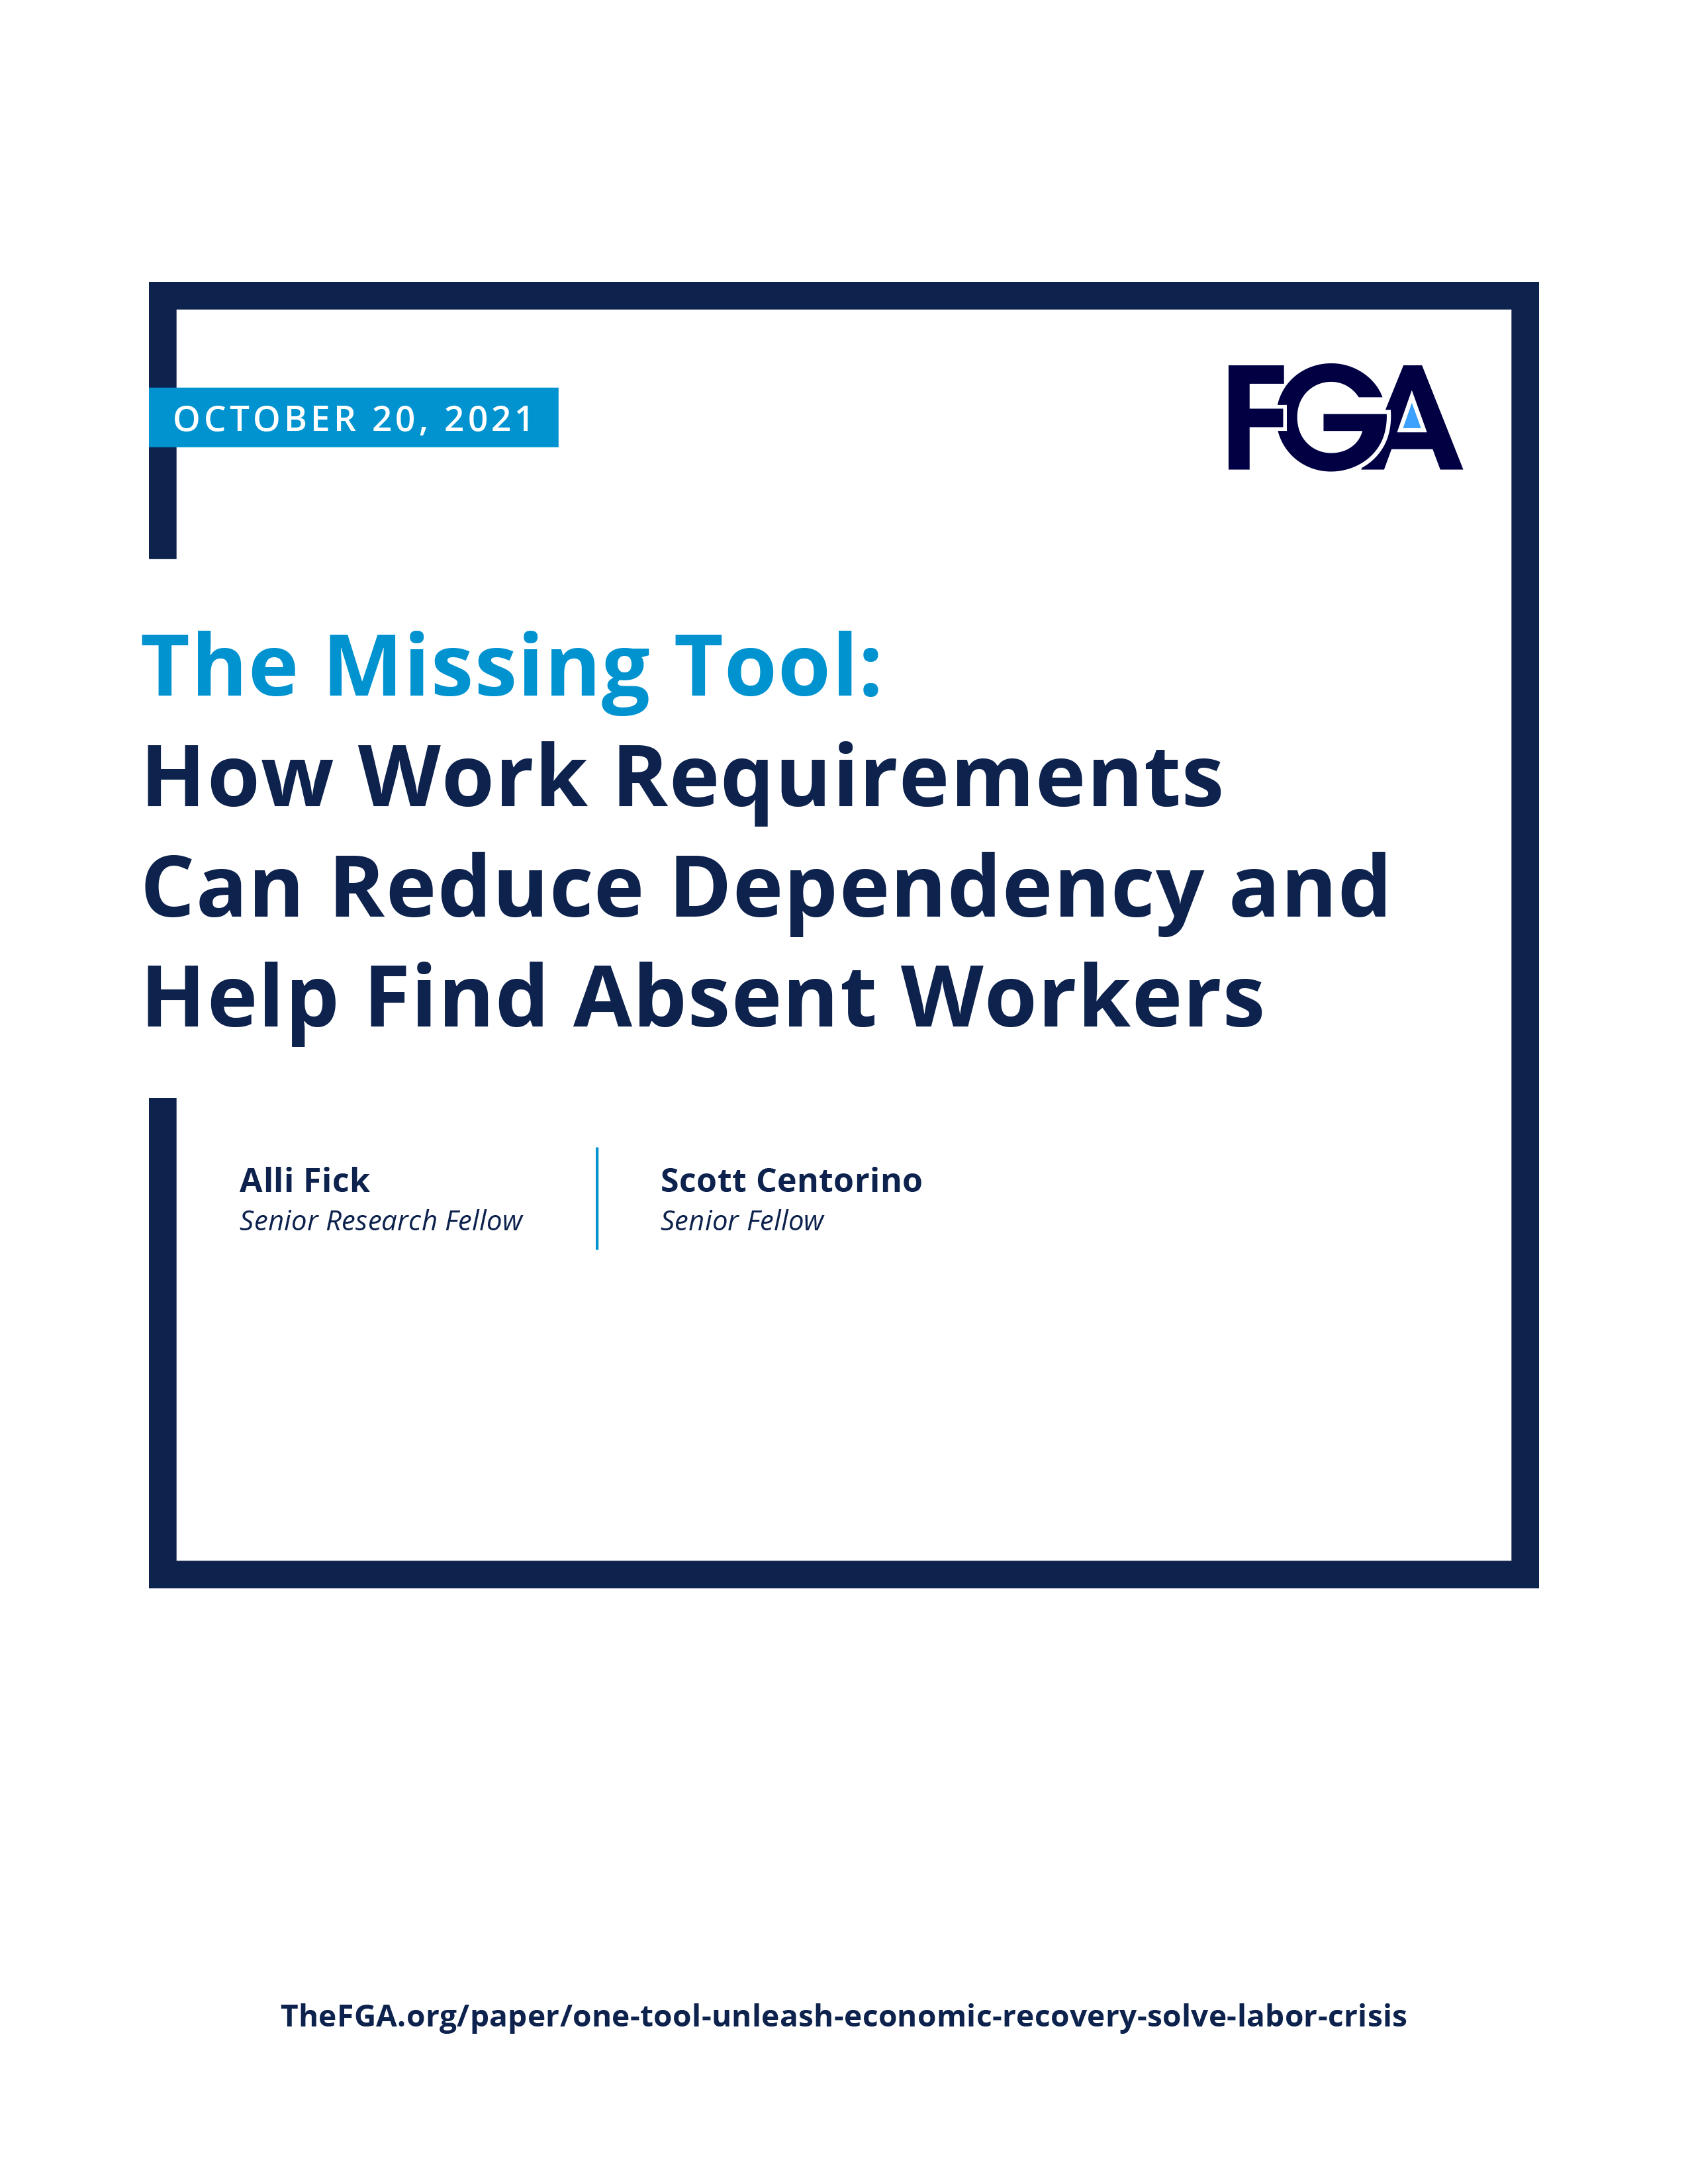 The Missing Tool: How Work Requirements Can Reduce Dependency and Help Find Absent Workers